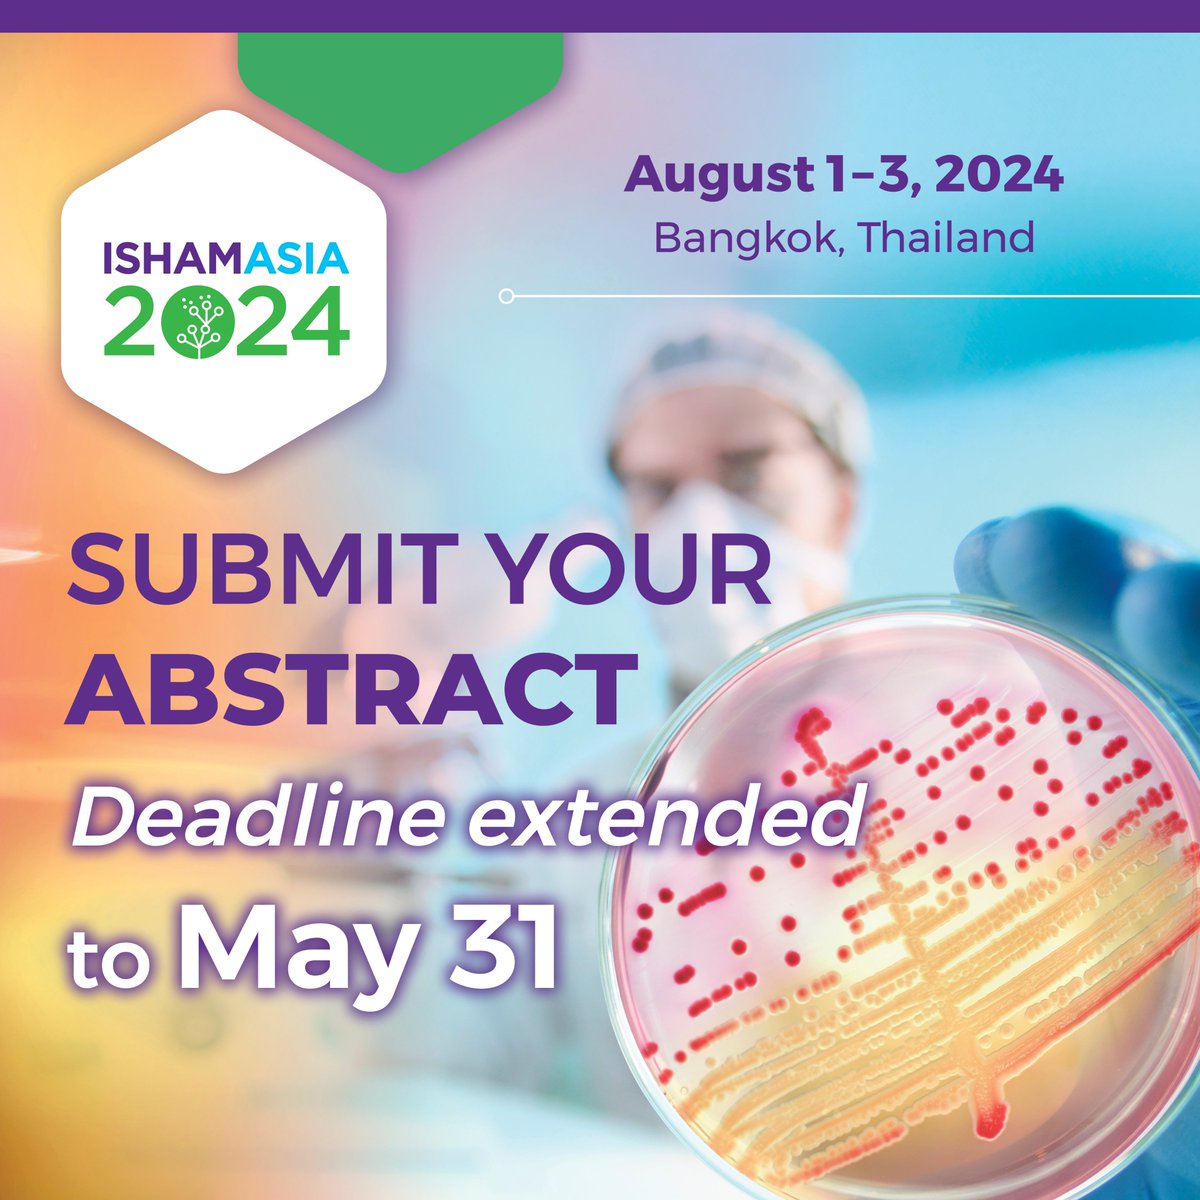 We’re extending the abstract submissions deadline to May 31! Here’s your last chance to present your research at the #ISHAMAsia Congress on August 1–3, Bangkok, Thailand: bit.ly/44rc1V9.

#thinkfungus #infectiousdiseases #microbiology